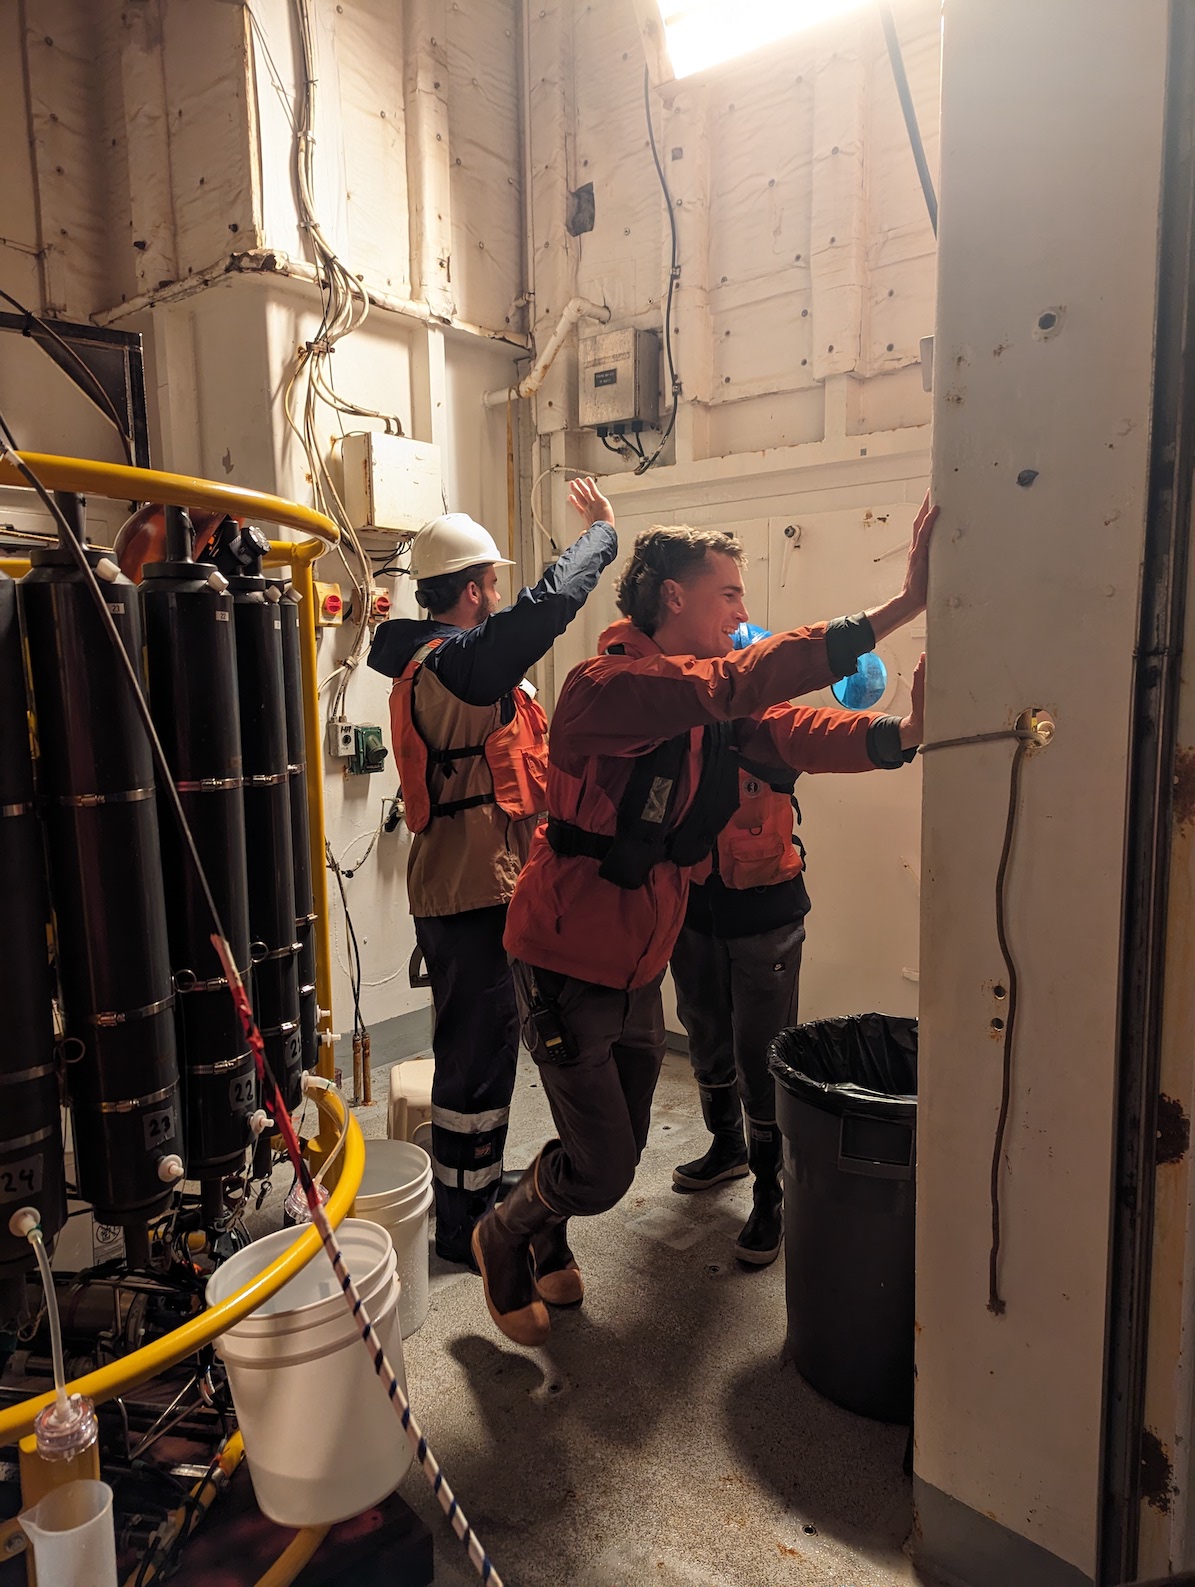 three people demostrating how to shut a door. CTD instrument in foreground